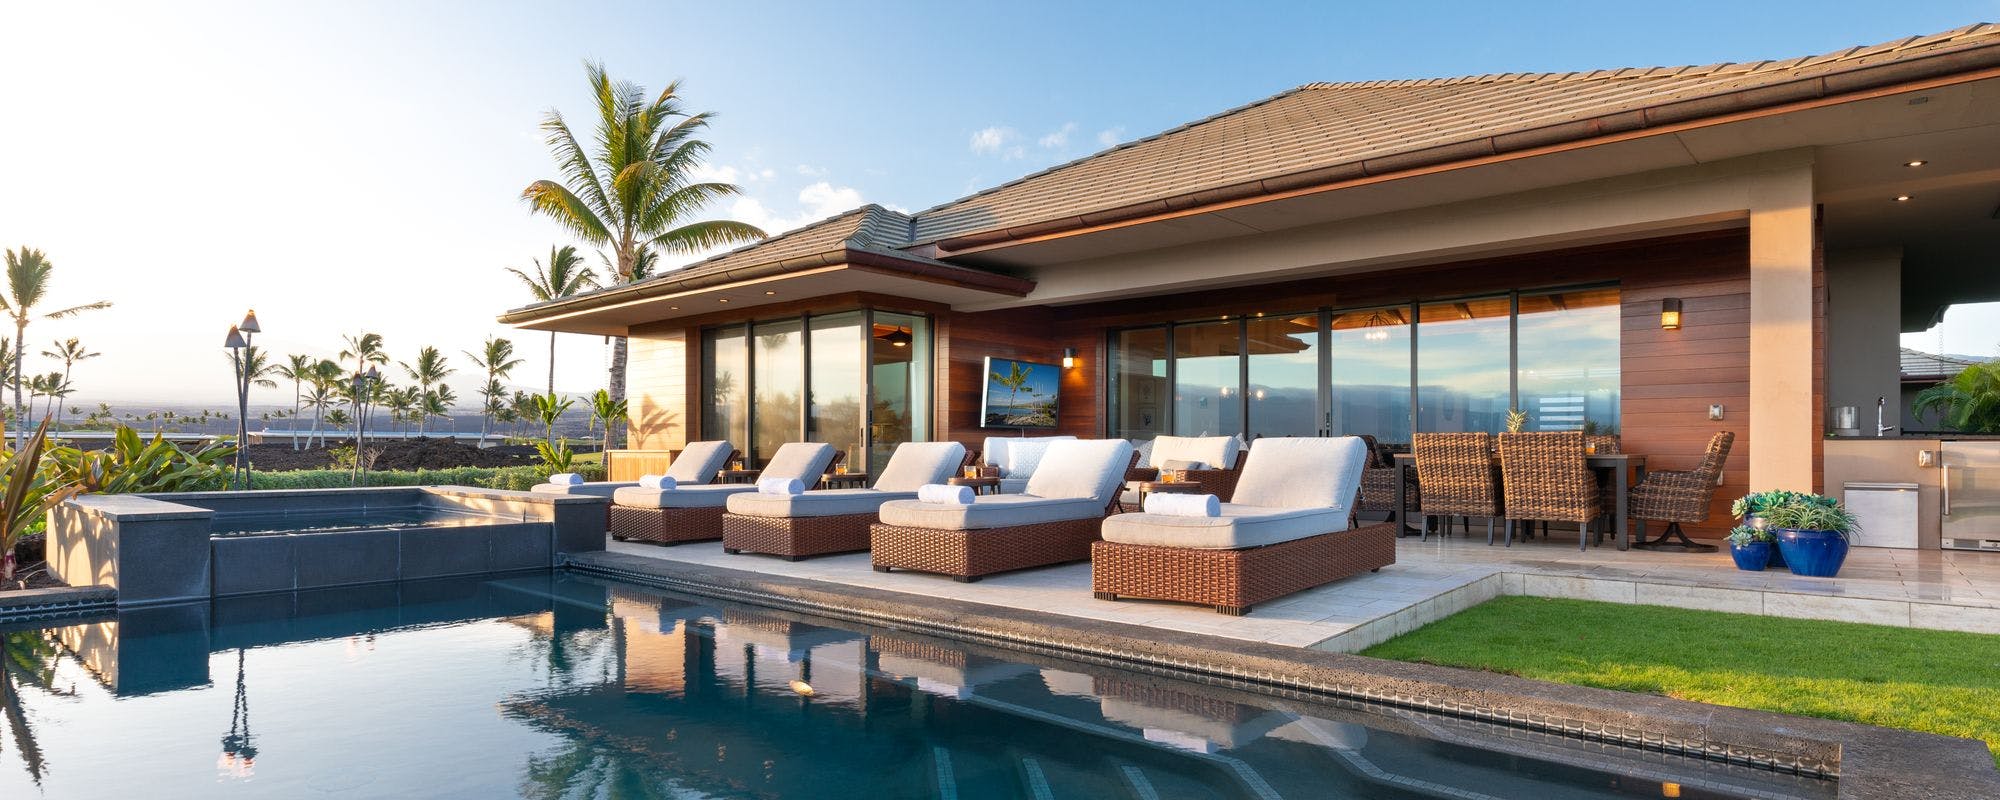 Luxury pool at private vacation rental home in Hawaii